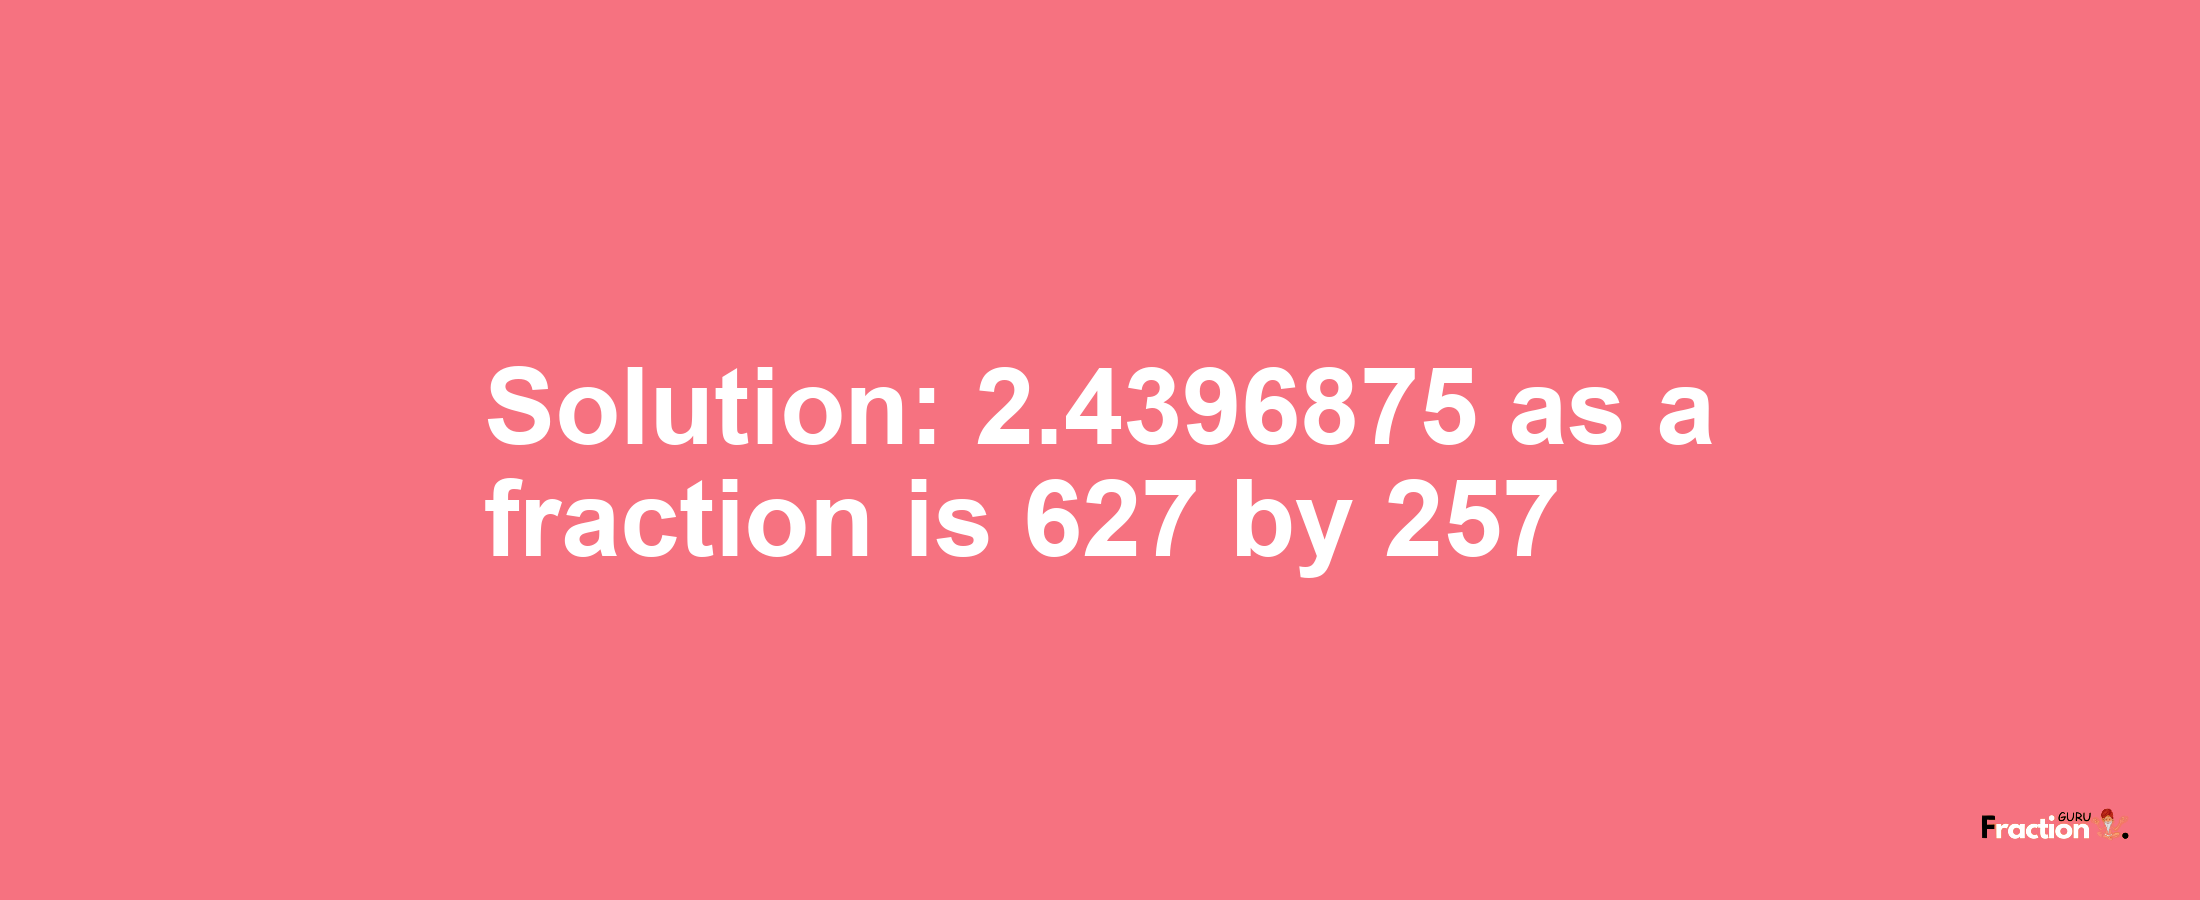 Solution:2.4396875 as a fraction is 627/257